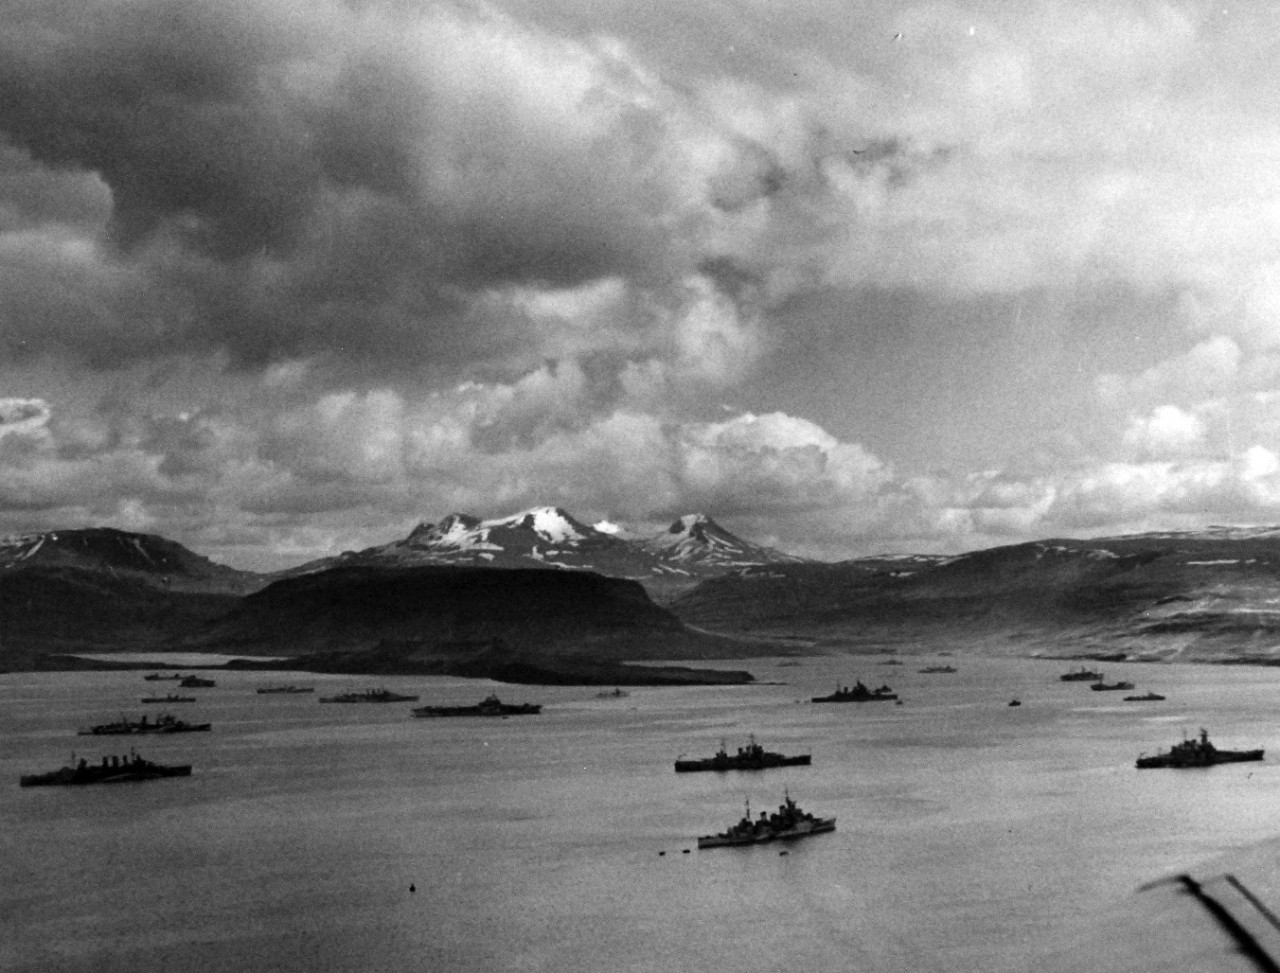 <p>80-G-24831: PQ-17 Arctic Convoy, June-July 1942. The covering forces of the PQ-17 Convoy (British and American ships) at anchor in the harbor at Hvalfjord, Iceland.&nbsp;</p>
